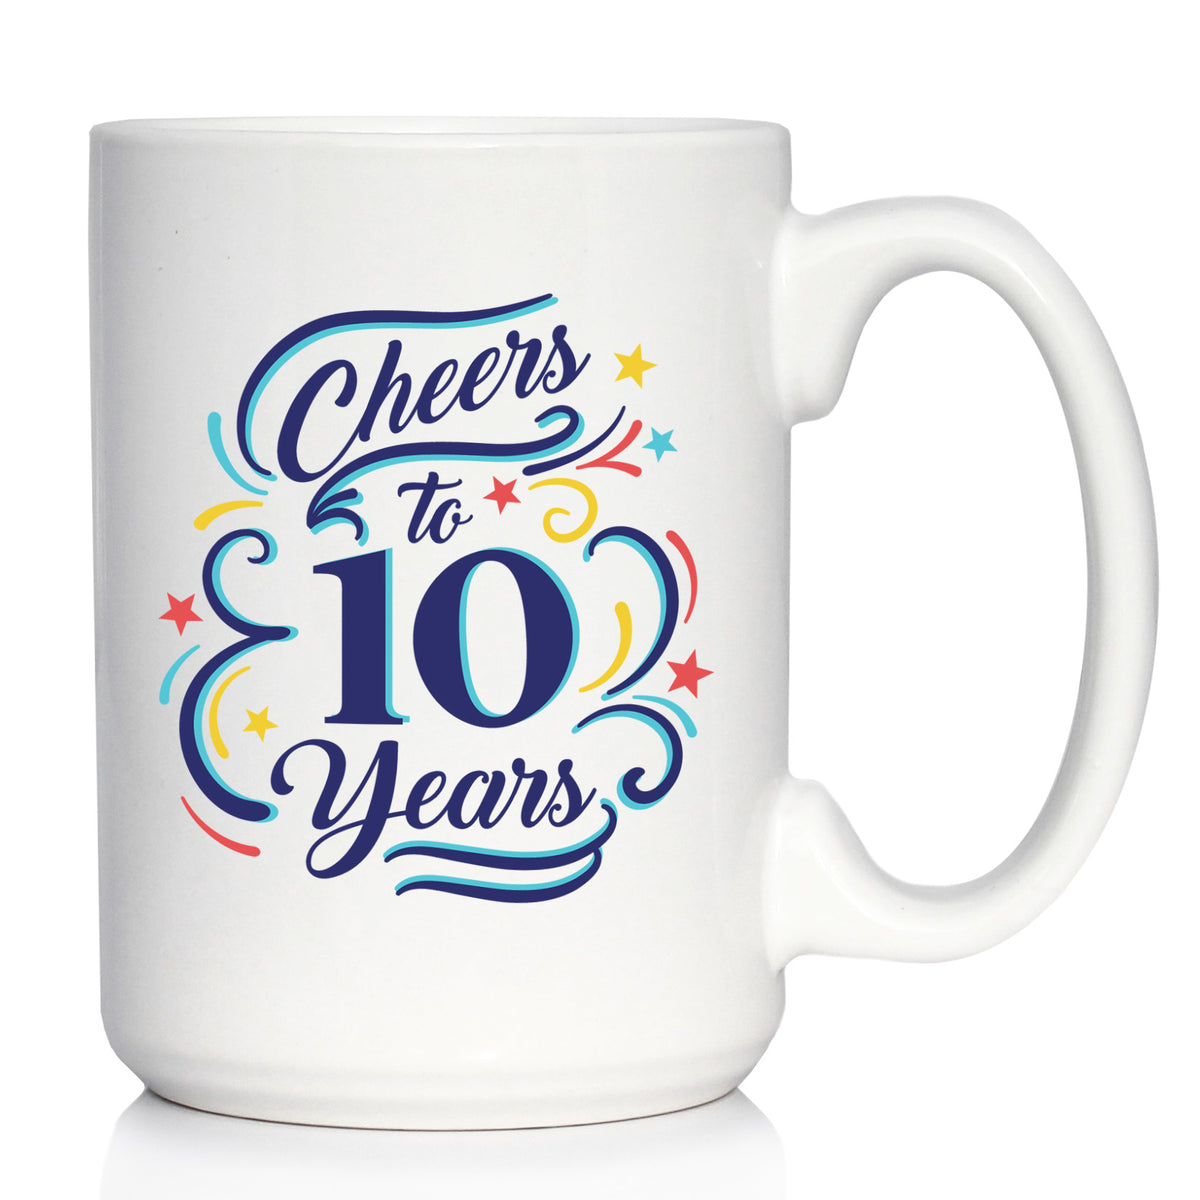 Cheers to 10 Years - Coffee Mug Gifts for Women &amp; Men - 10th Anniversary Party Decor